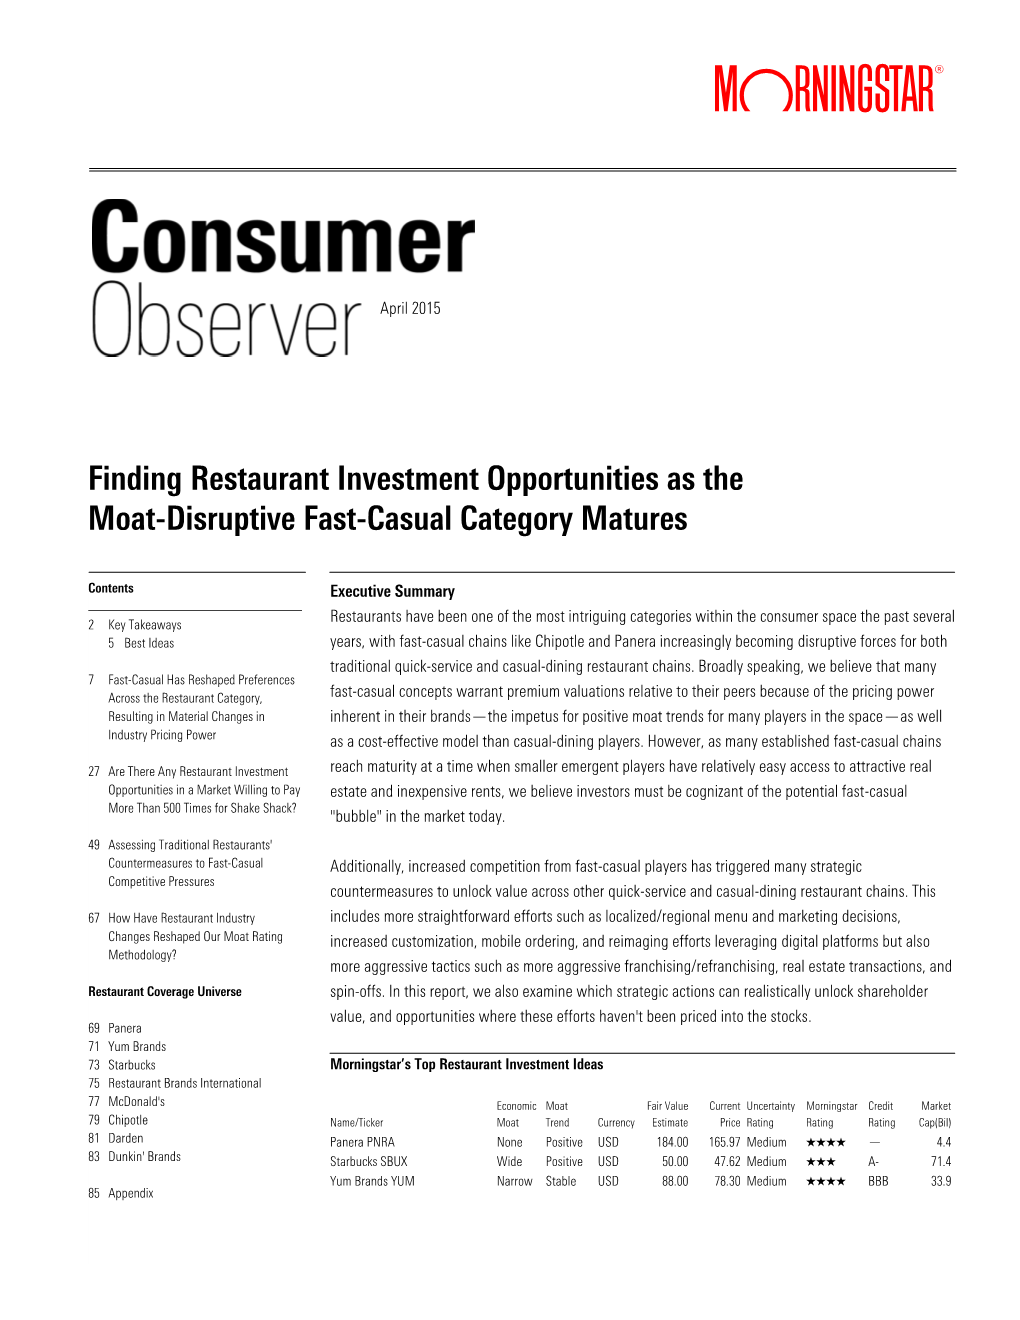 Finding Restaurant Investment Opportunities As the Moat -Disruptive Fast-Casual Category Matures